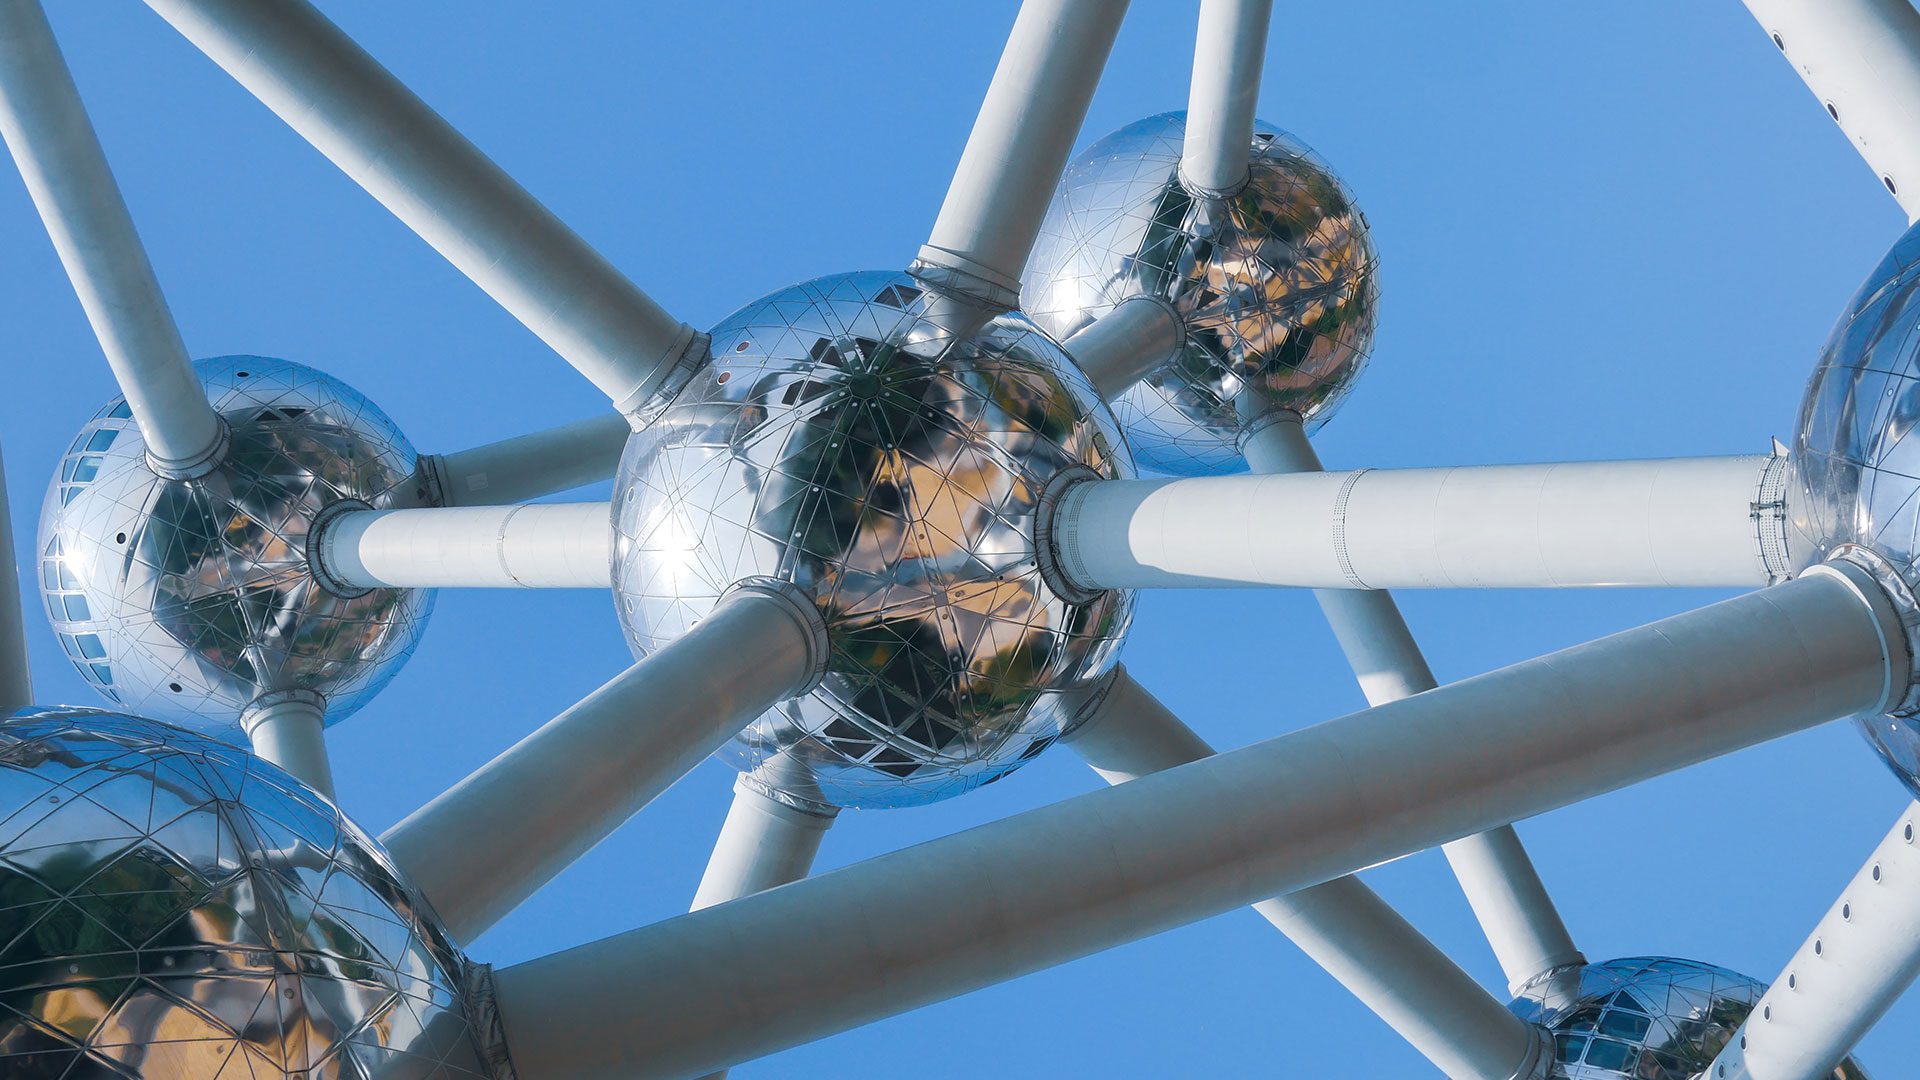 Atomium, in Brussels (a visual symbol of scientific progress and connection, in Europe)